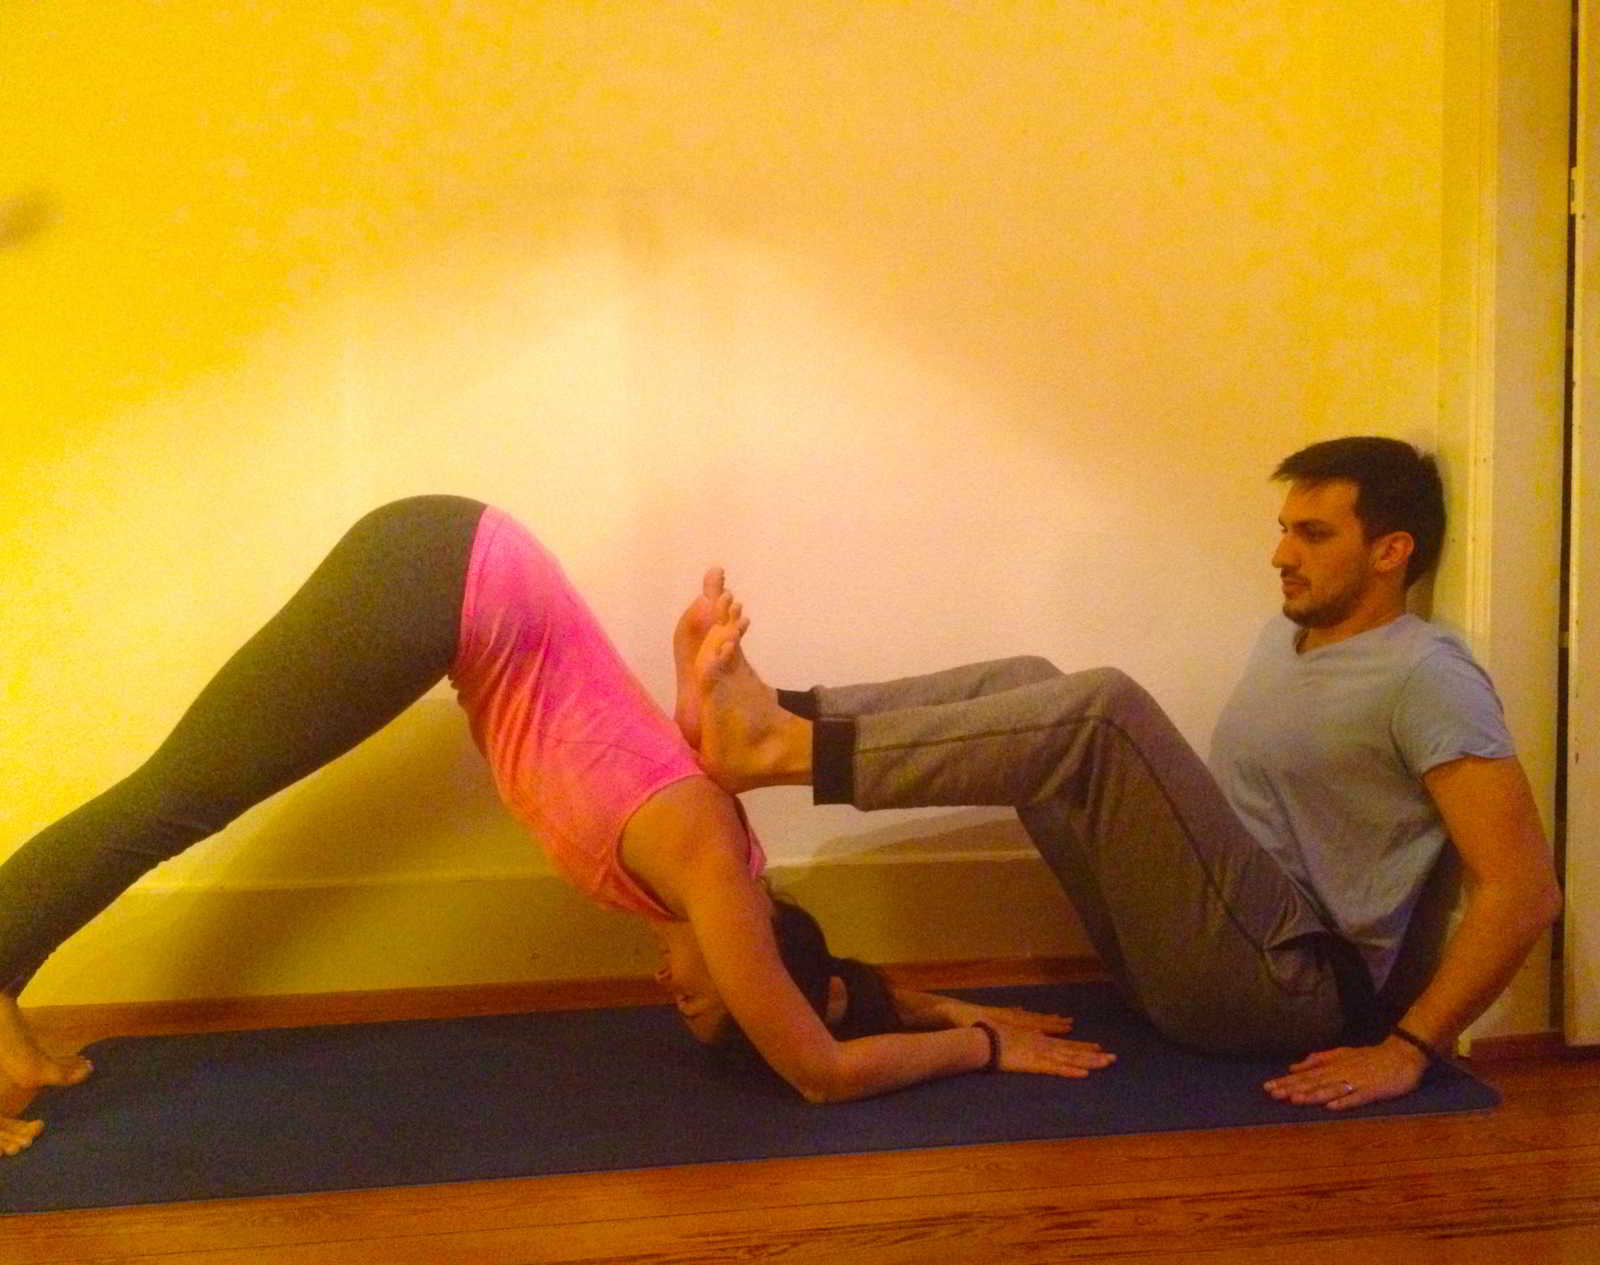 Easy Couples Yoga Poses You've Got to Try With Your Partner - Yoga Medicine